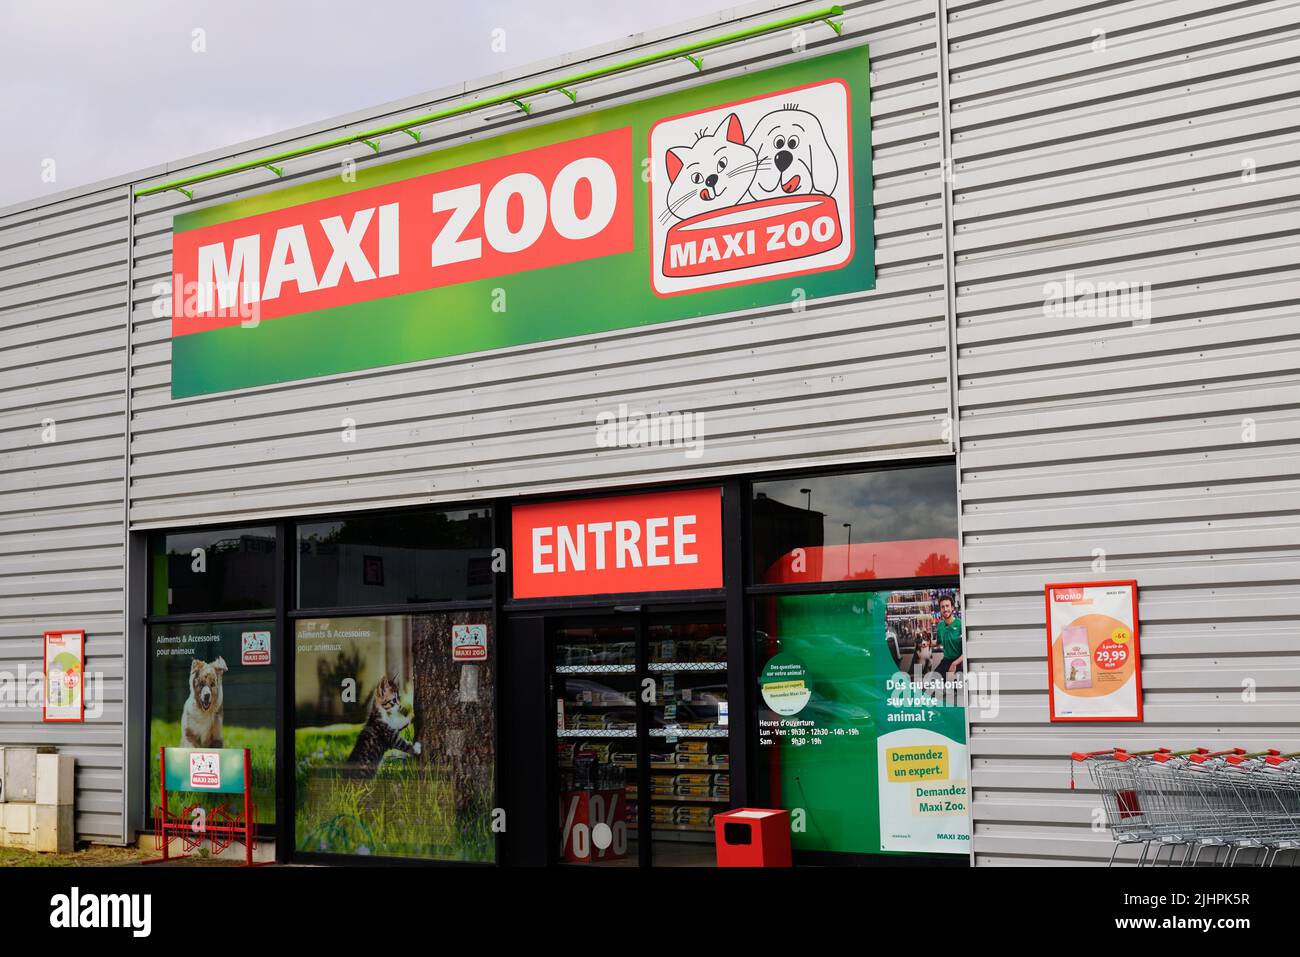 Bordeaux , Aquitaine  France - 07 04 2022 : maxi zoo logo brand and text sign on entrance shop facade pet store and animal accessories Stock Photo